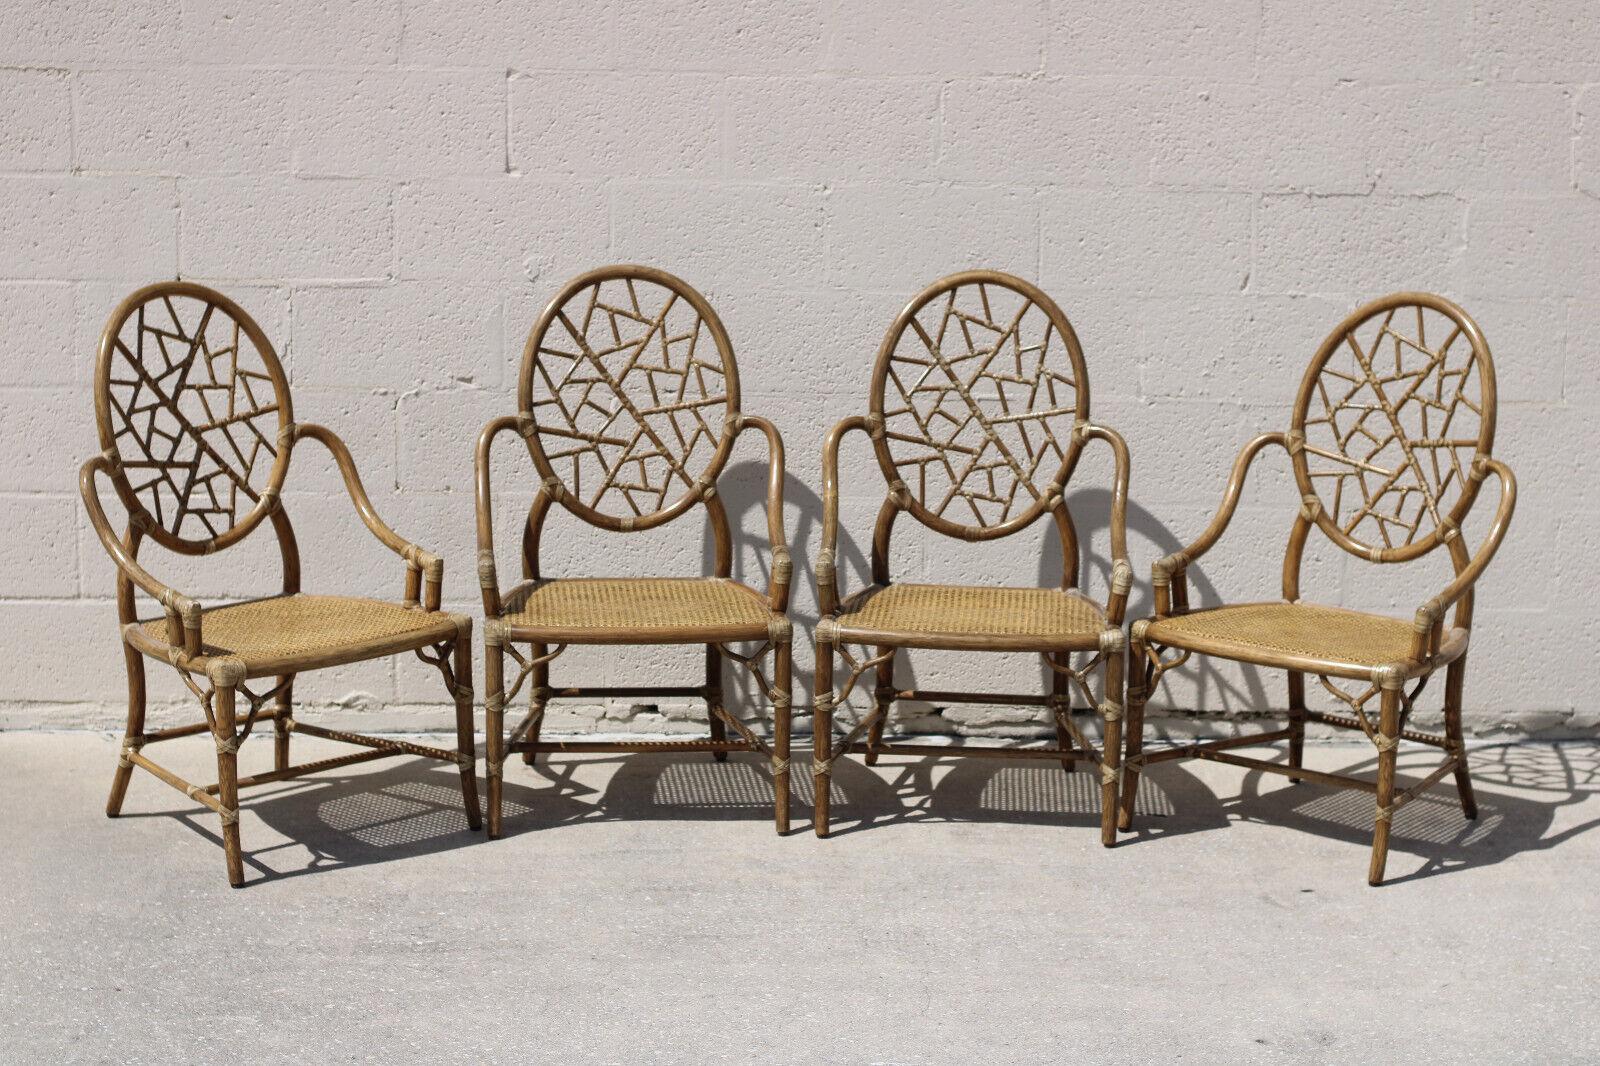 Elinor McGuire Iconic Cracked Ice Dining Chairs, a Set of 4, with McGuire Label In Good Condition For Sale In Vero Beach, FL